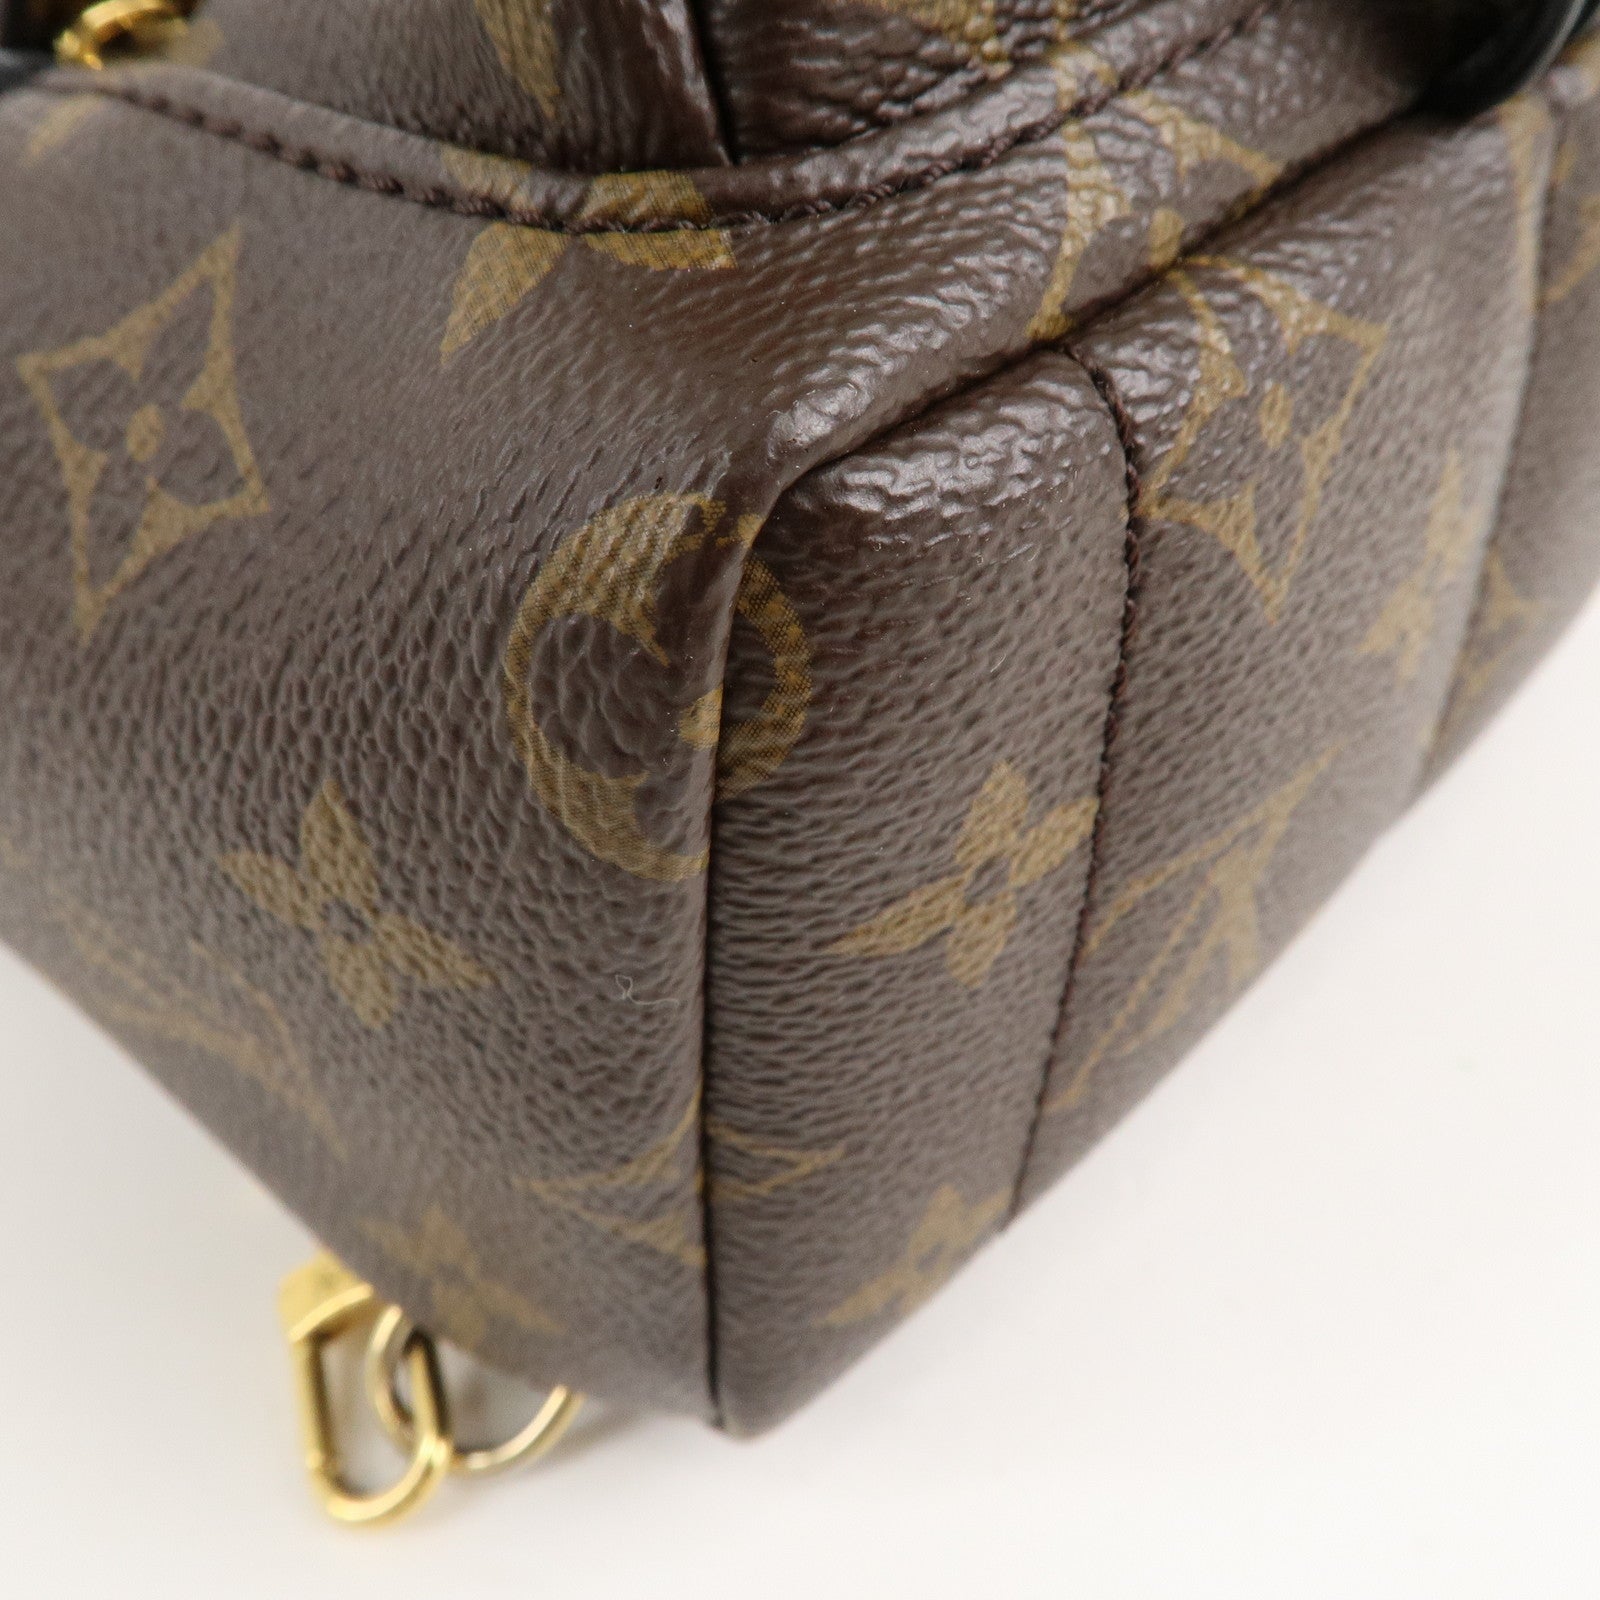 LOUIS VUITTON Monogram PM Mini Backpack – The Find